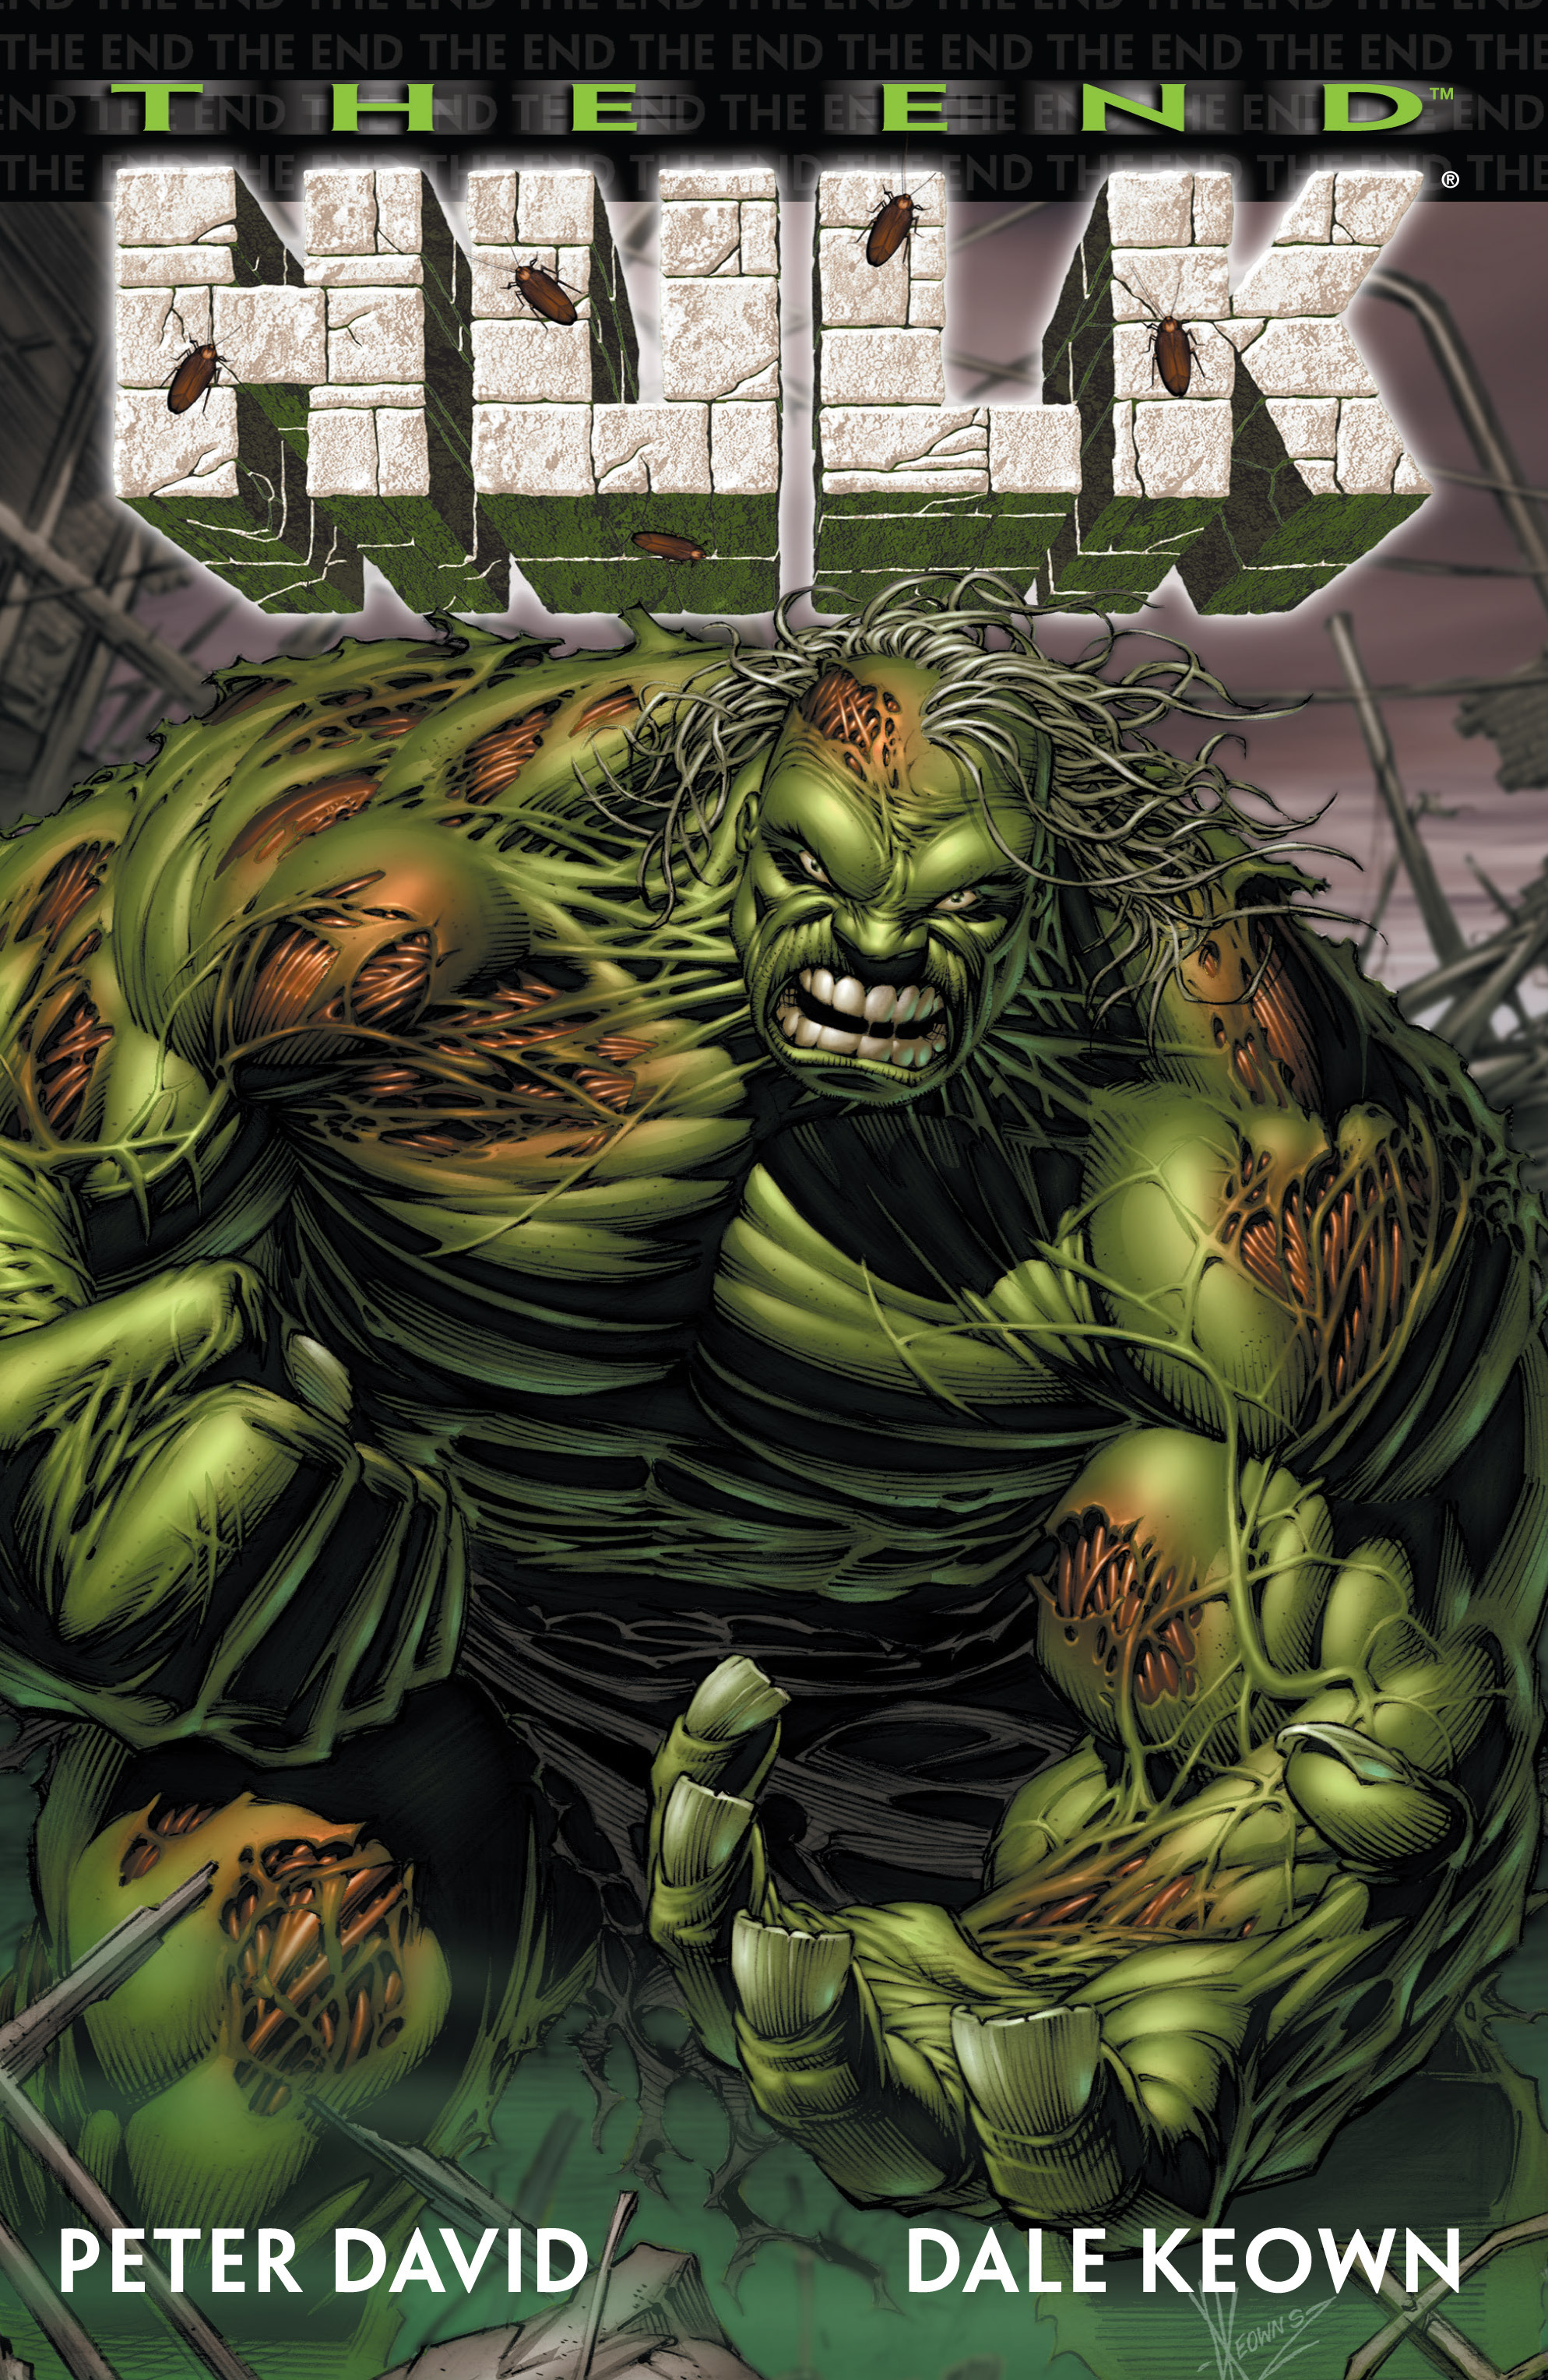 Read online Incredible Hulk: The End comic -  Issue # TPB - 1